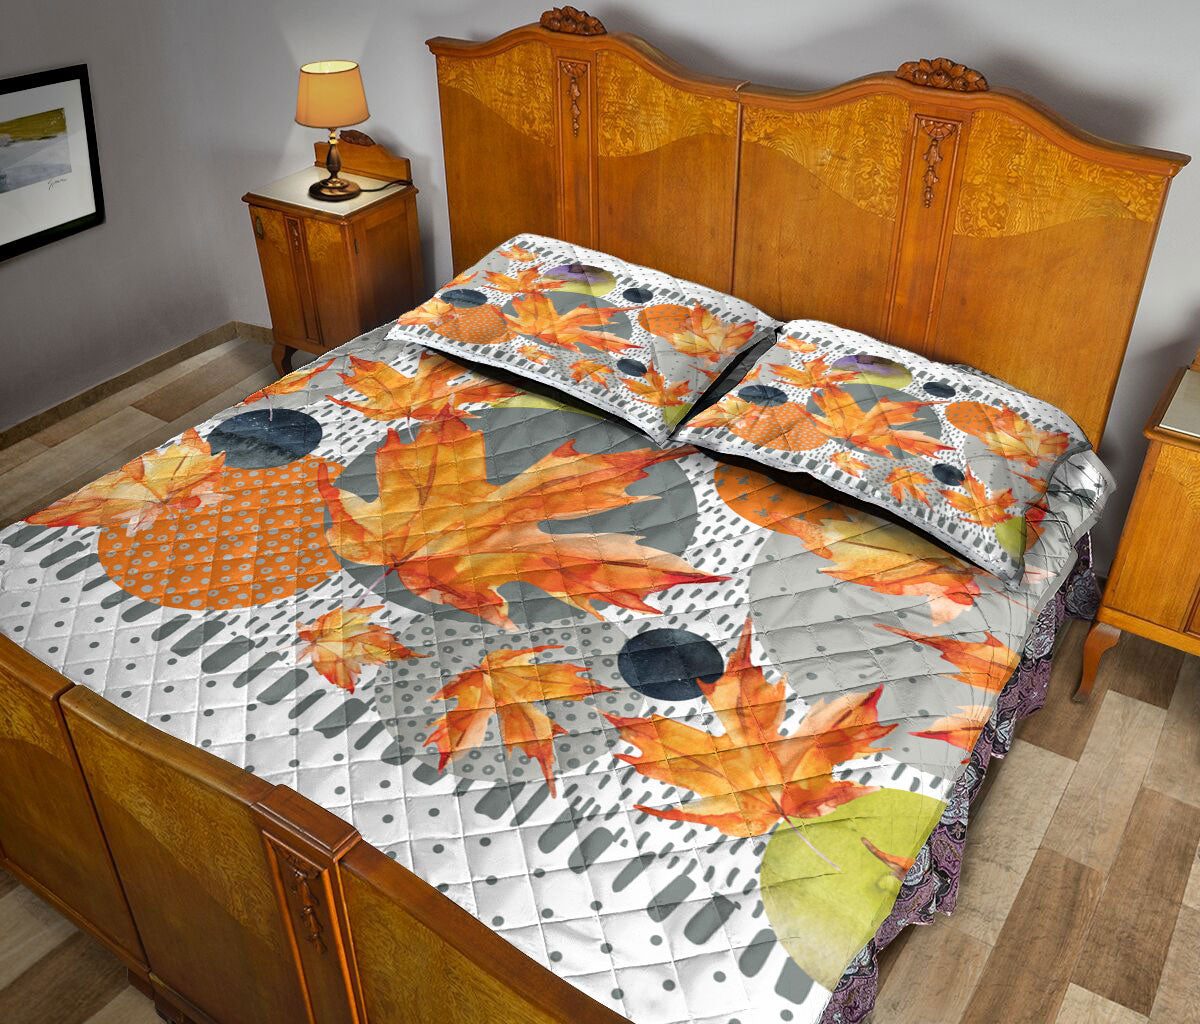 Ohaprints-Quilt-Bed-Set-Pillowcase-Fall-Maple-Leaf-Autumn-Leaves-Autumn-Thanksgiving-Autumn-Harvest-Leaves-Blanket-Bedspread-Bedding-3259-King (90'' x 100'')